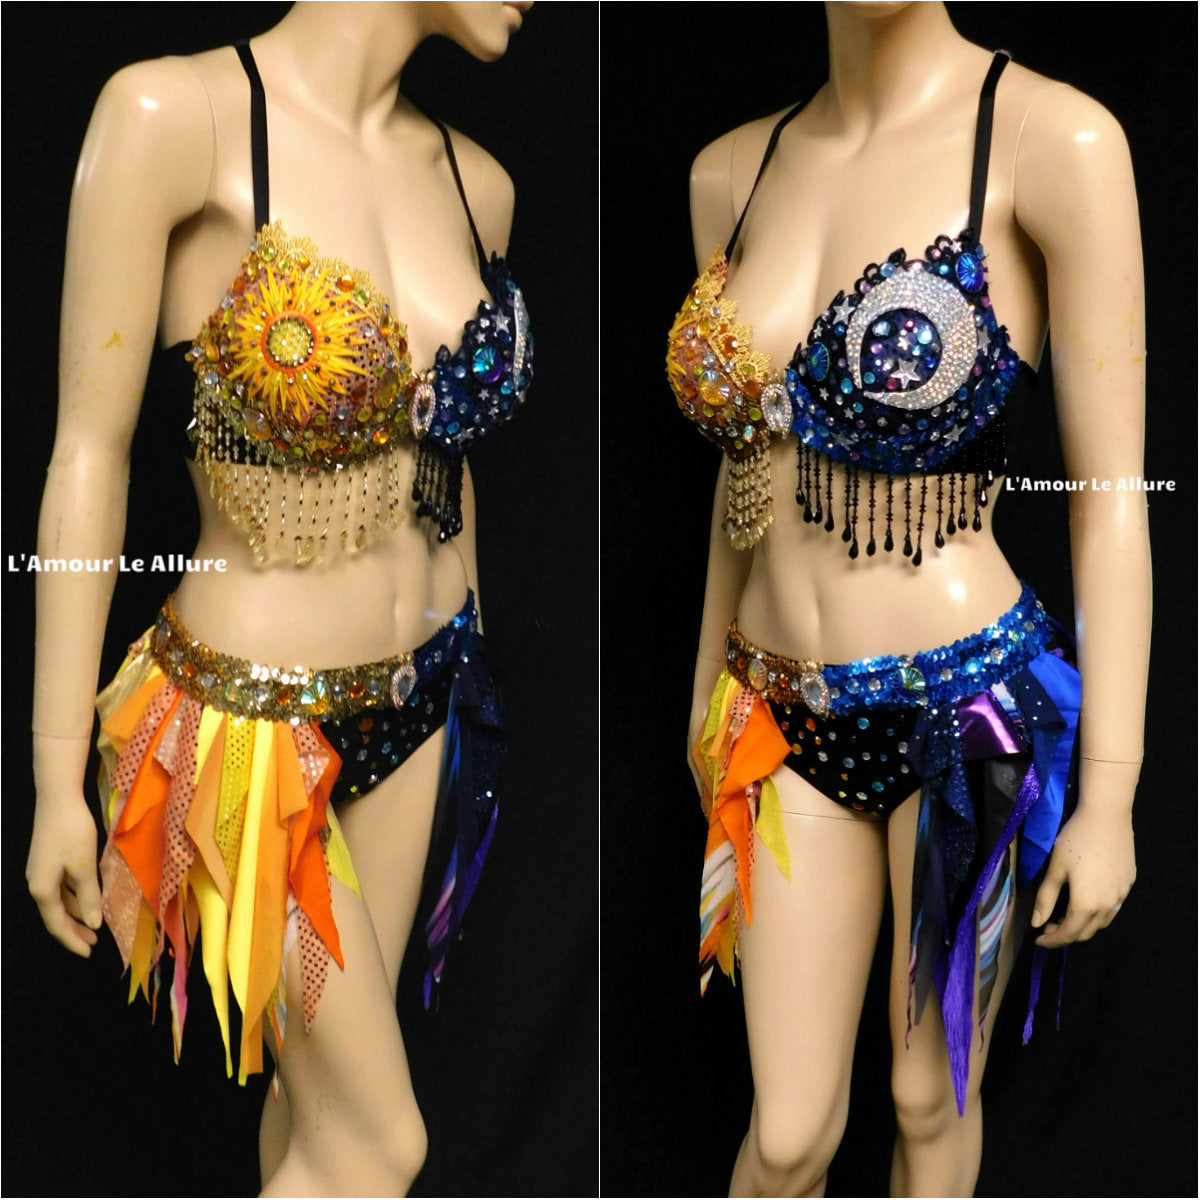 Sun and Moon bra and Half Skirt Dance Halloween Costume – L'Amour Le Allure